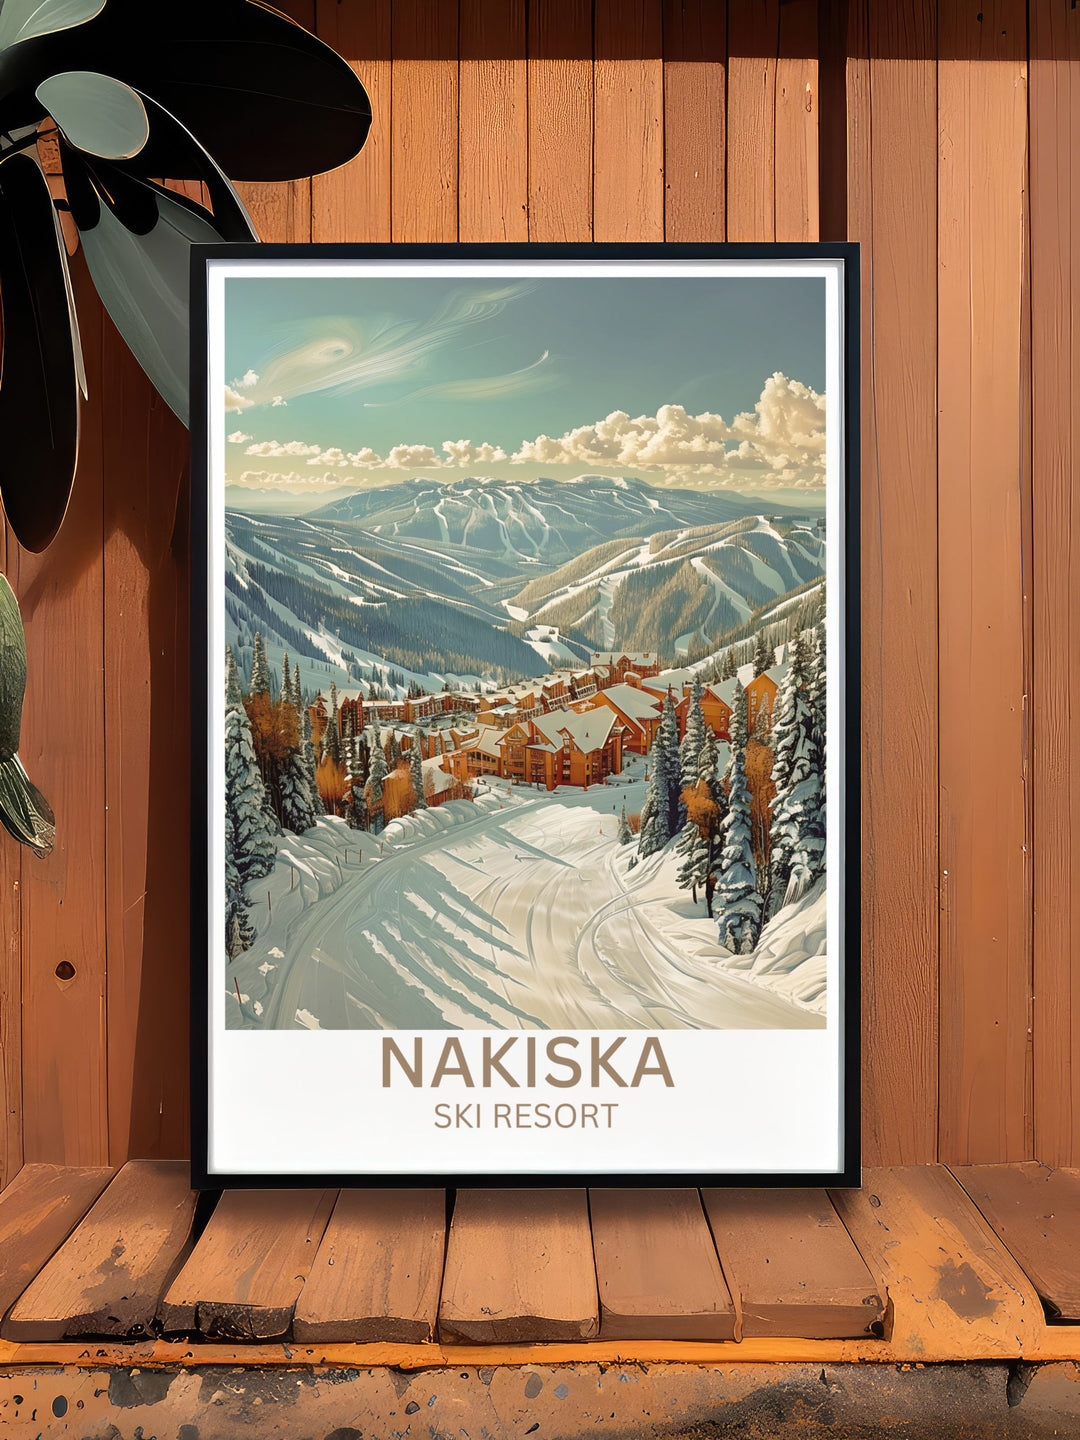 Customizable print featuring a memorable race or event at Nakiska, ideal for commemorating special occasions.